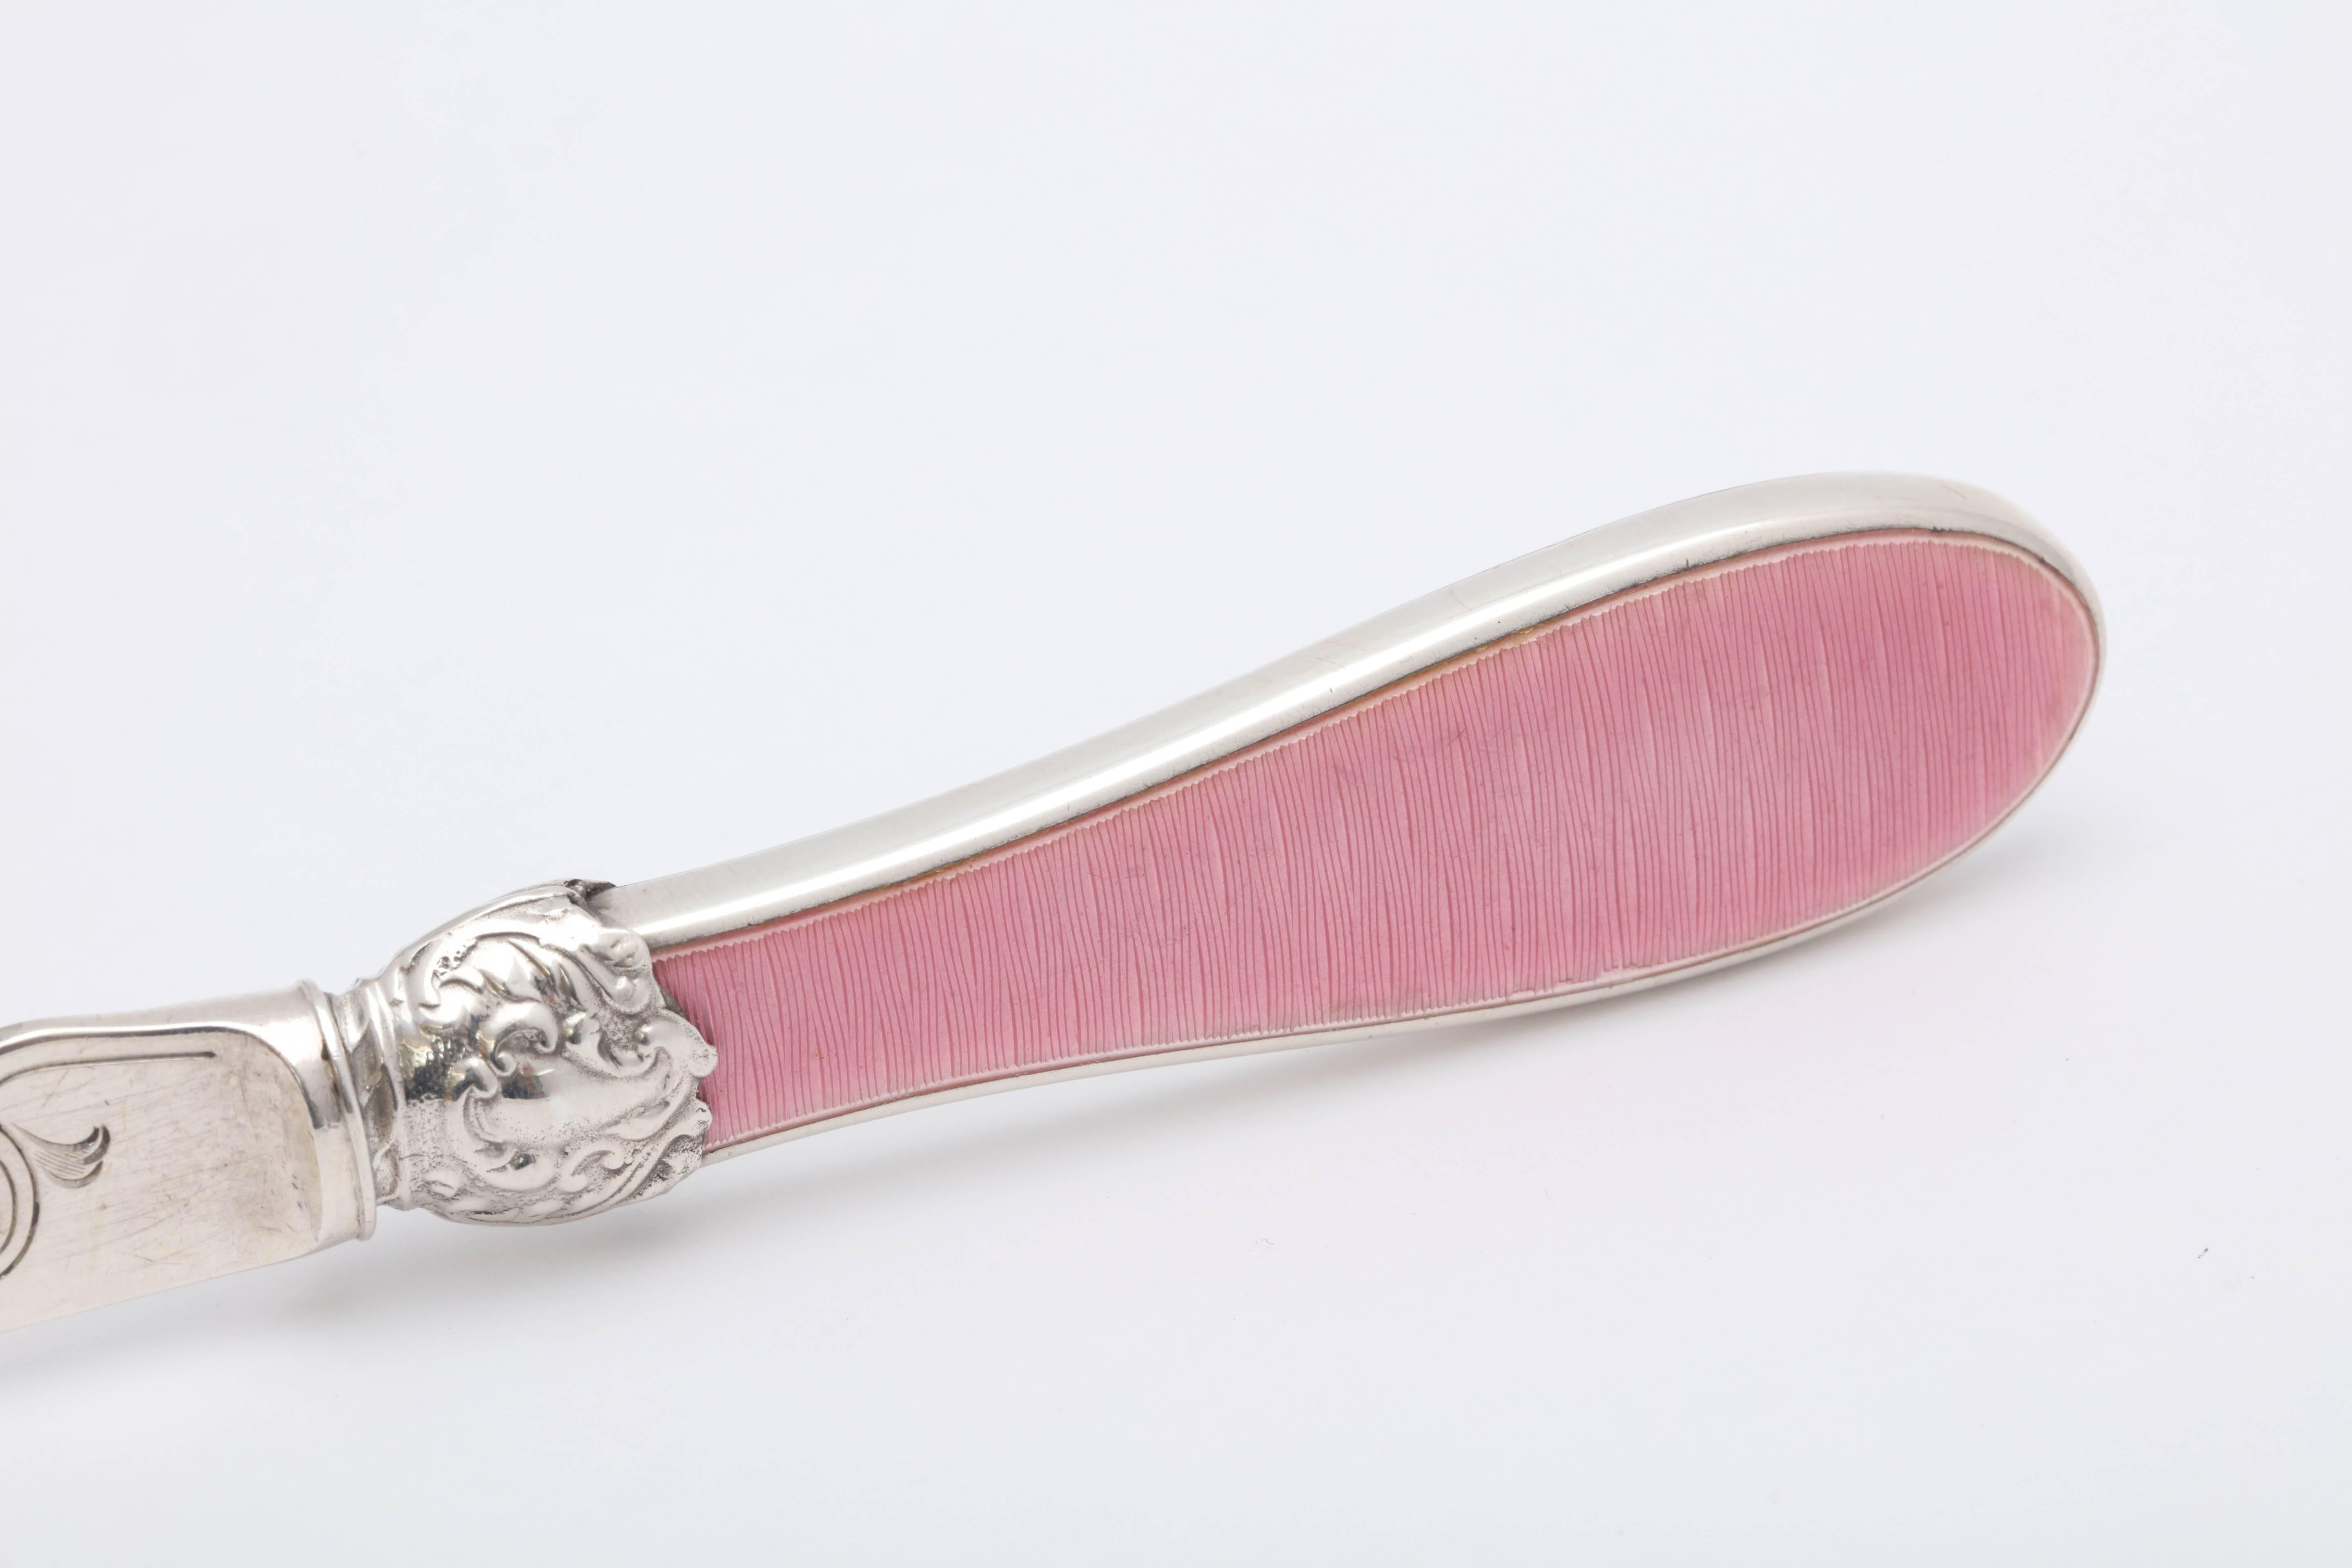 Edwardian Style Sterling Silver and Pink Guilloche Enamel-Mounted Letter Opener 1